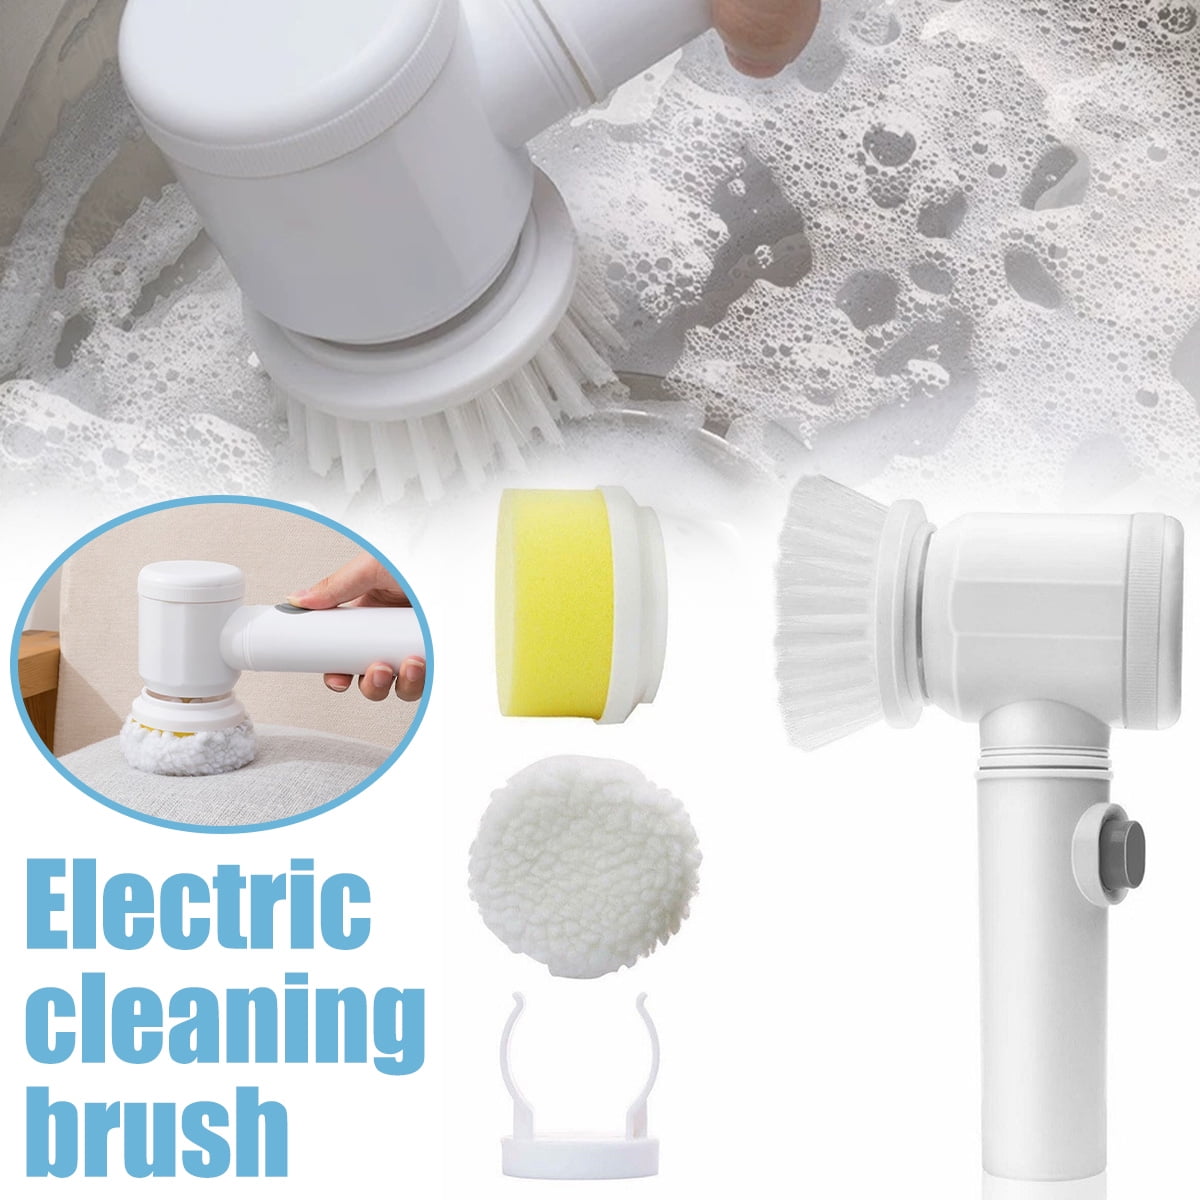 USB Household Electric Cleaning Brush Cleaner Multifunctional Kitchen  Dishwashing Gadgets Handheld Wireless Cleaning Supplies